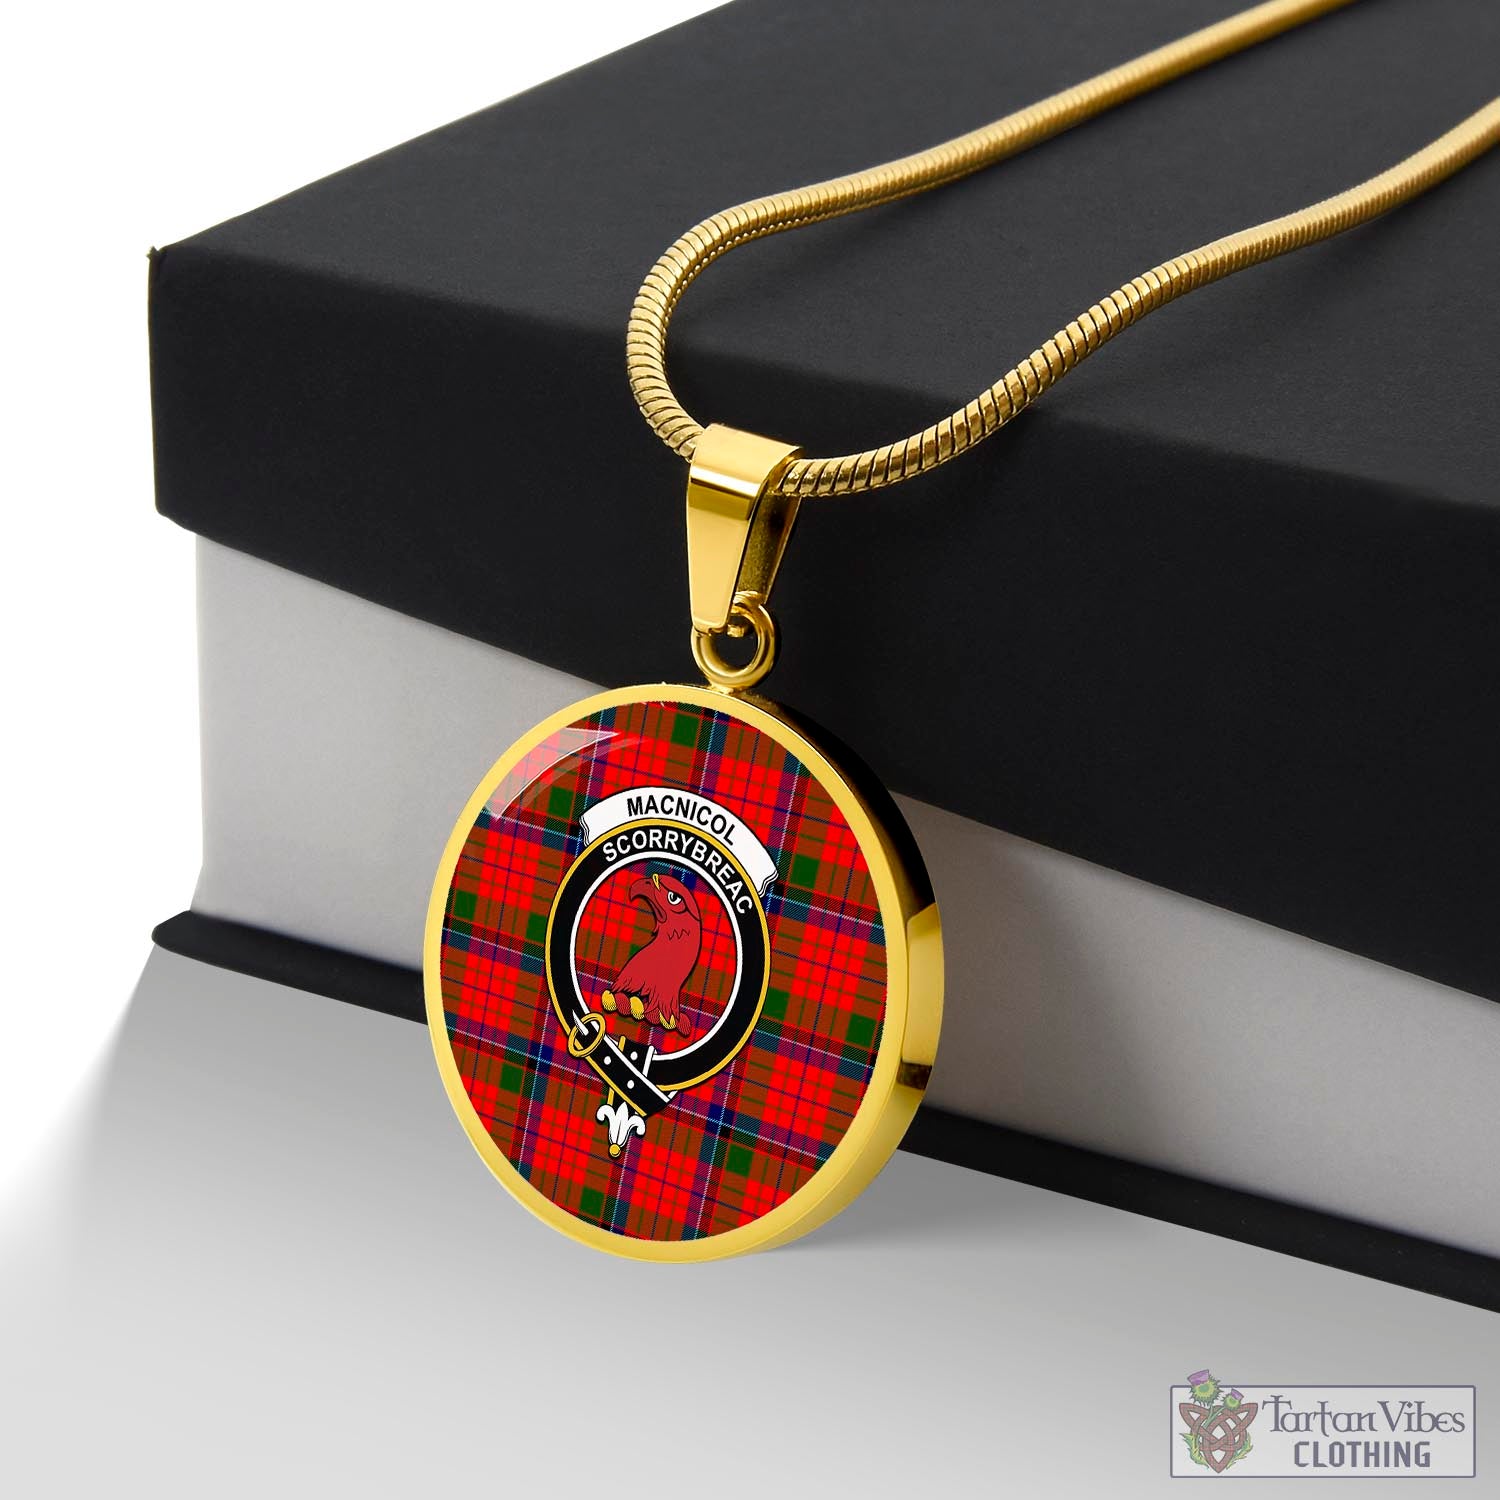 Tartan Vibes Clothing MacNicol of Scorrybreac Tartan Circle Necklace with Family Crest